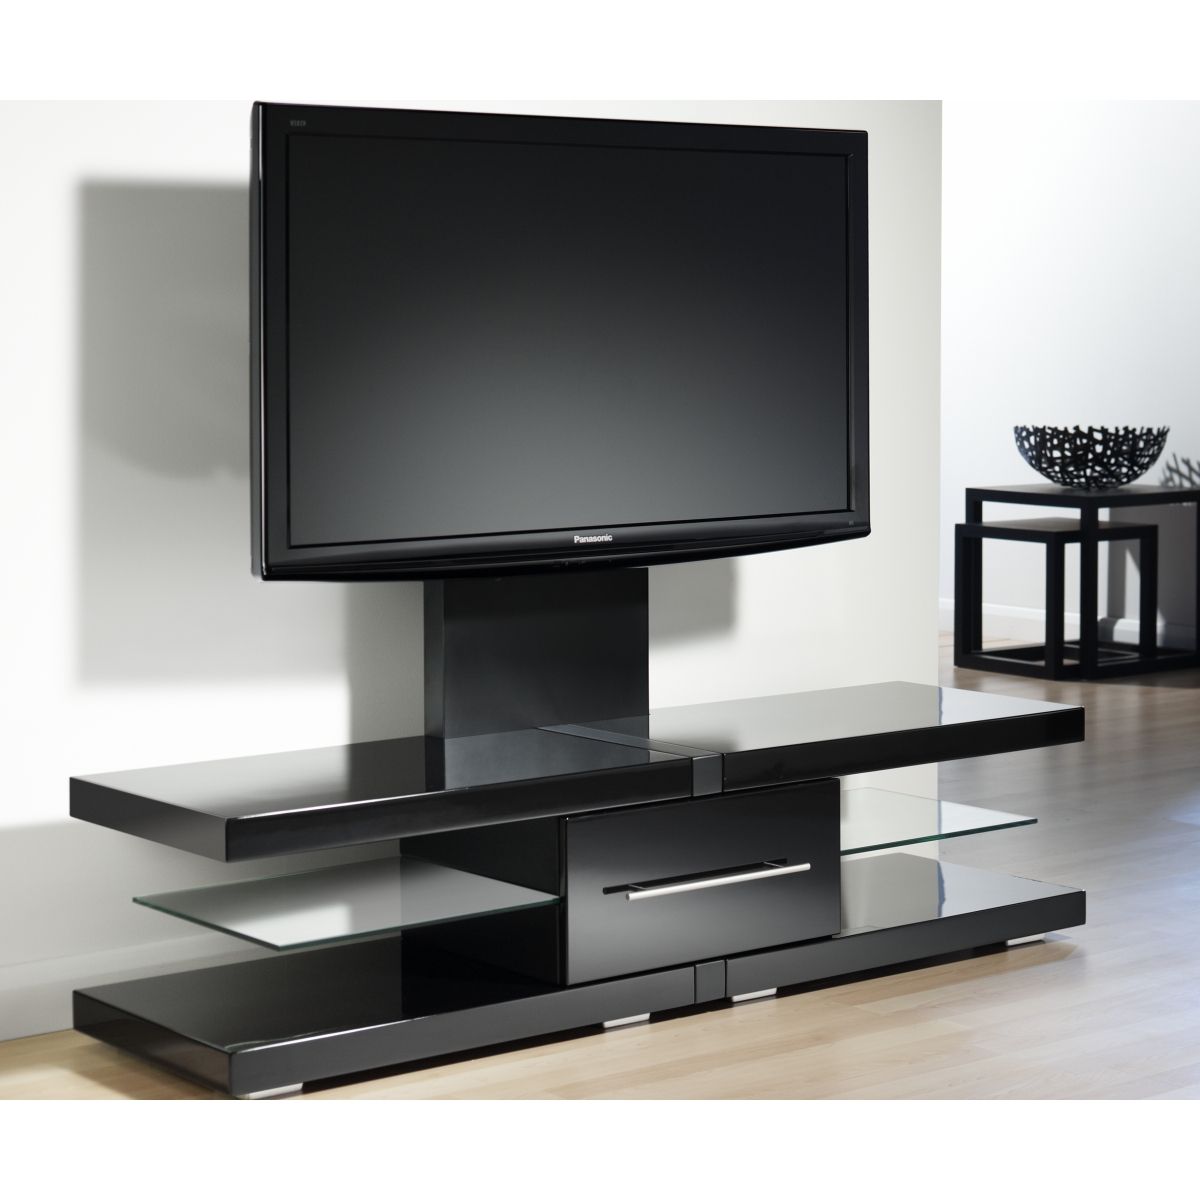 Black Metallic Flat Screen Tv Stand & Mount 42 60 Inch Pertaining To Tall Tv Stands For Flat Screen (View 7 of 15)